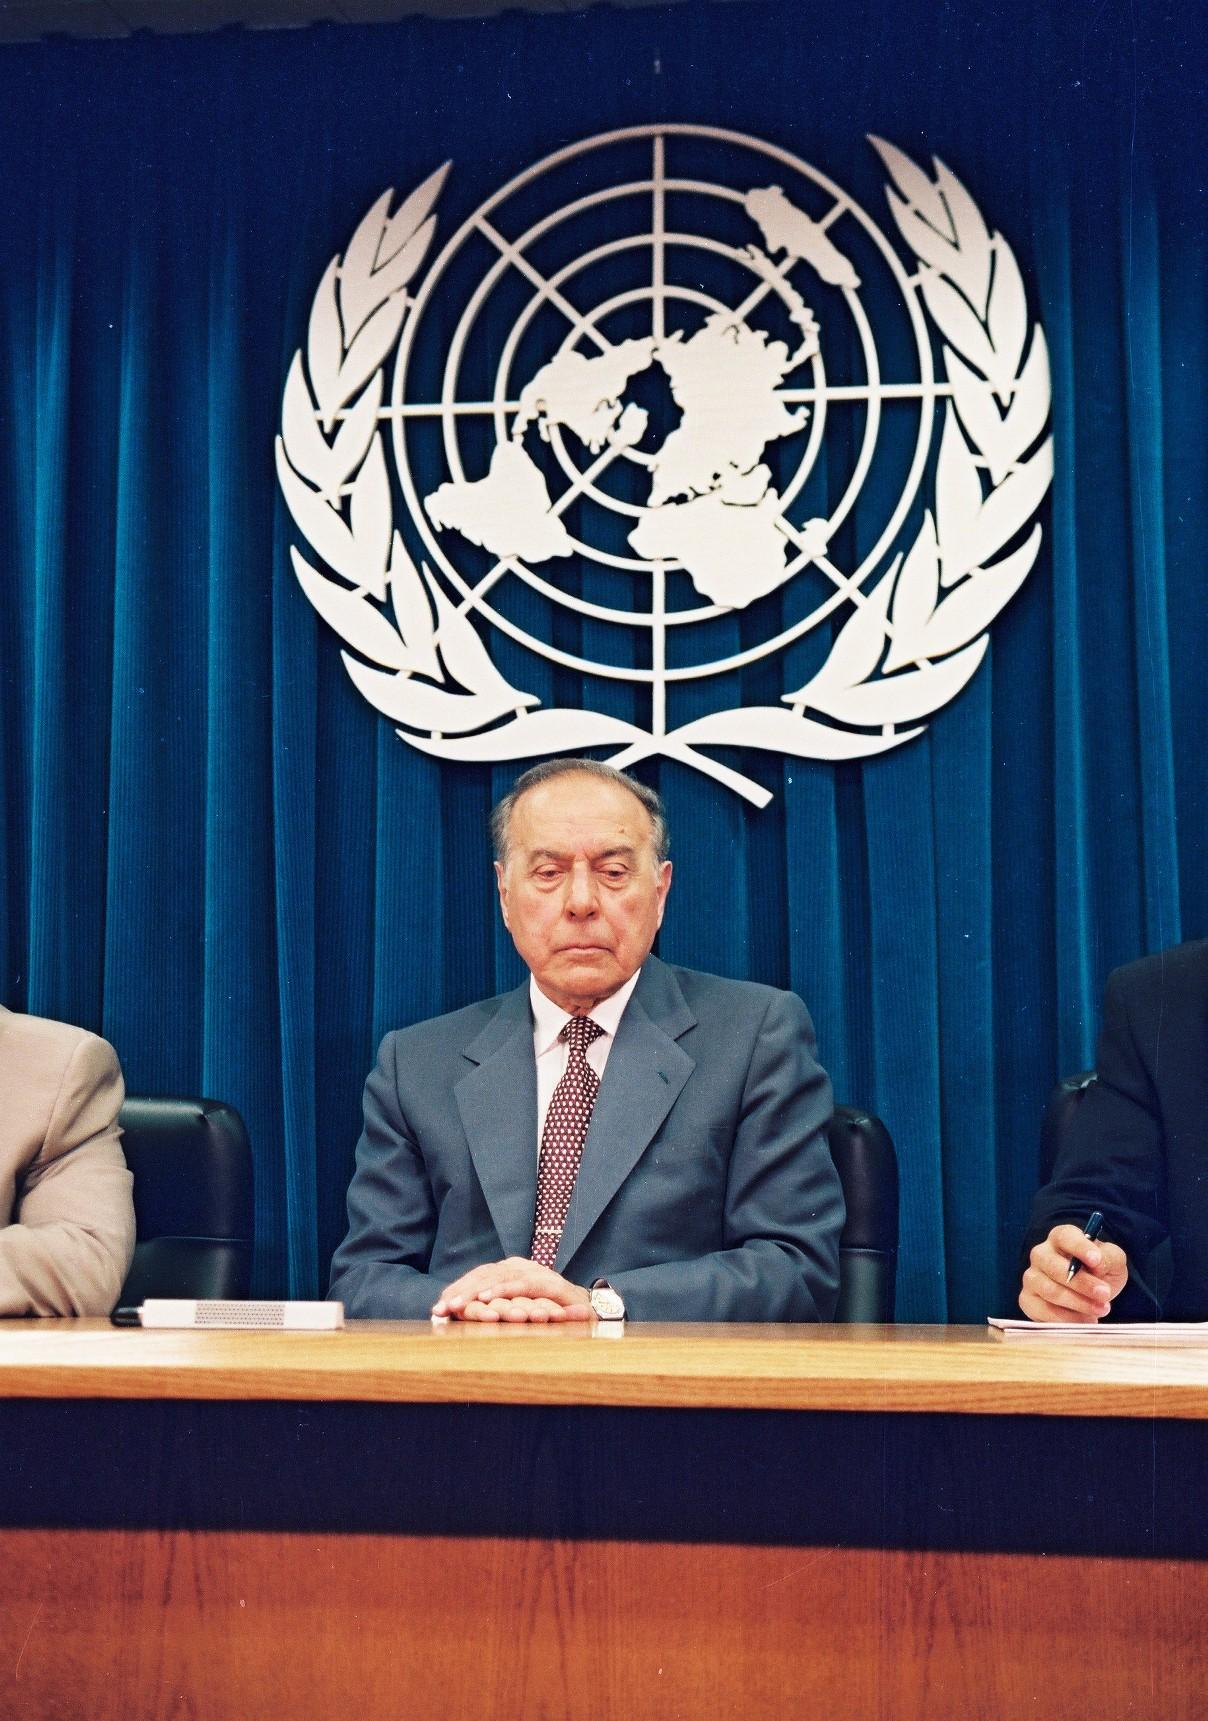 Statement of Heydar Aliyev, President of the Republic of Azerbaijan at the press conference with ‎foreign correspondents accredited at the United Nations - July 28, 1997‎